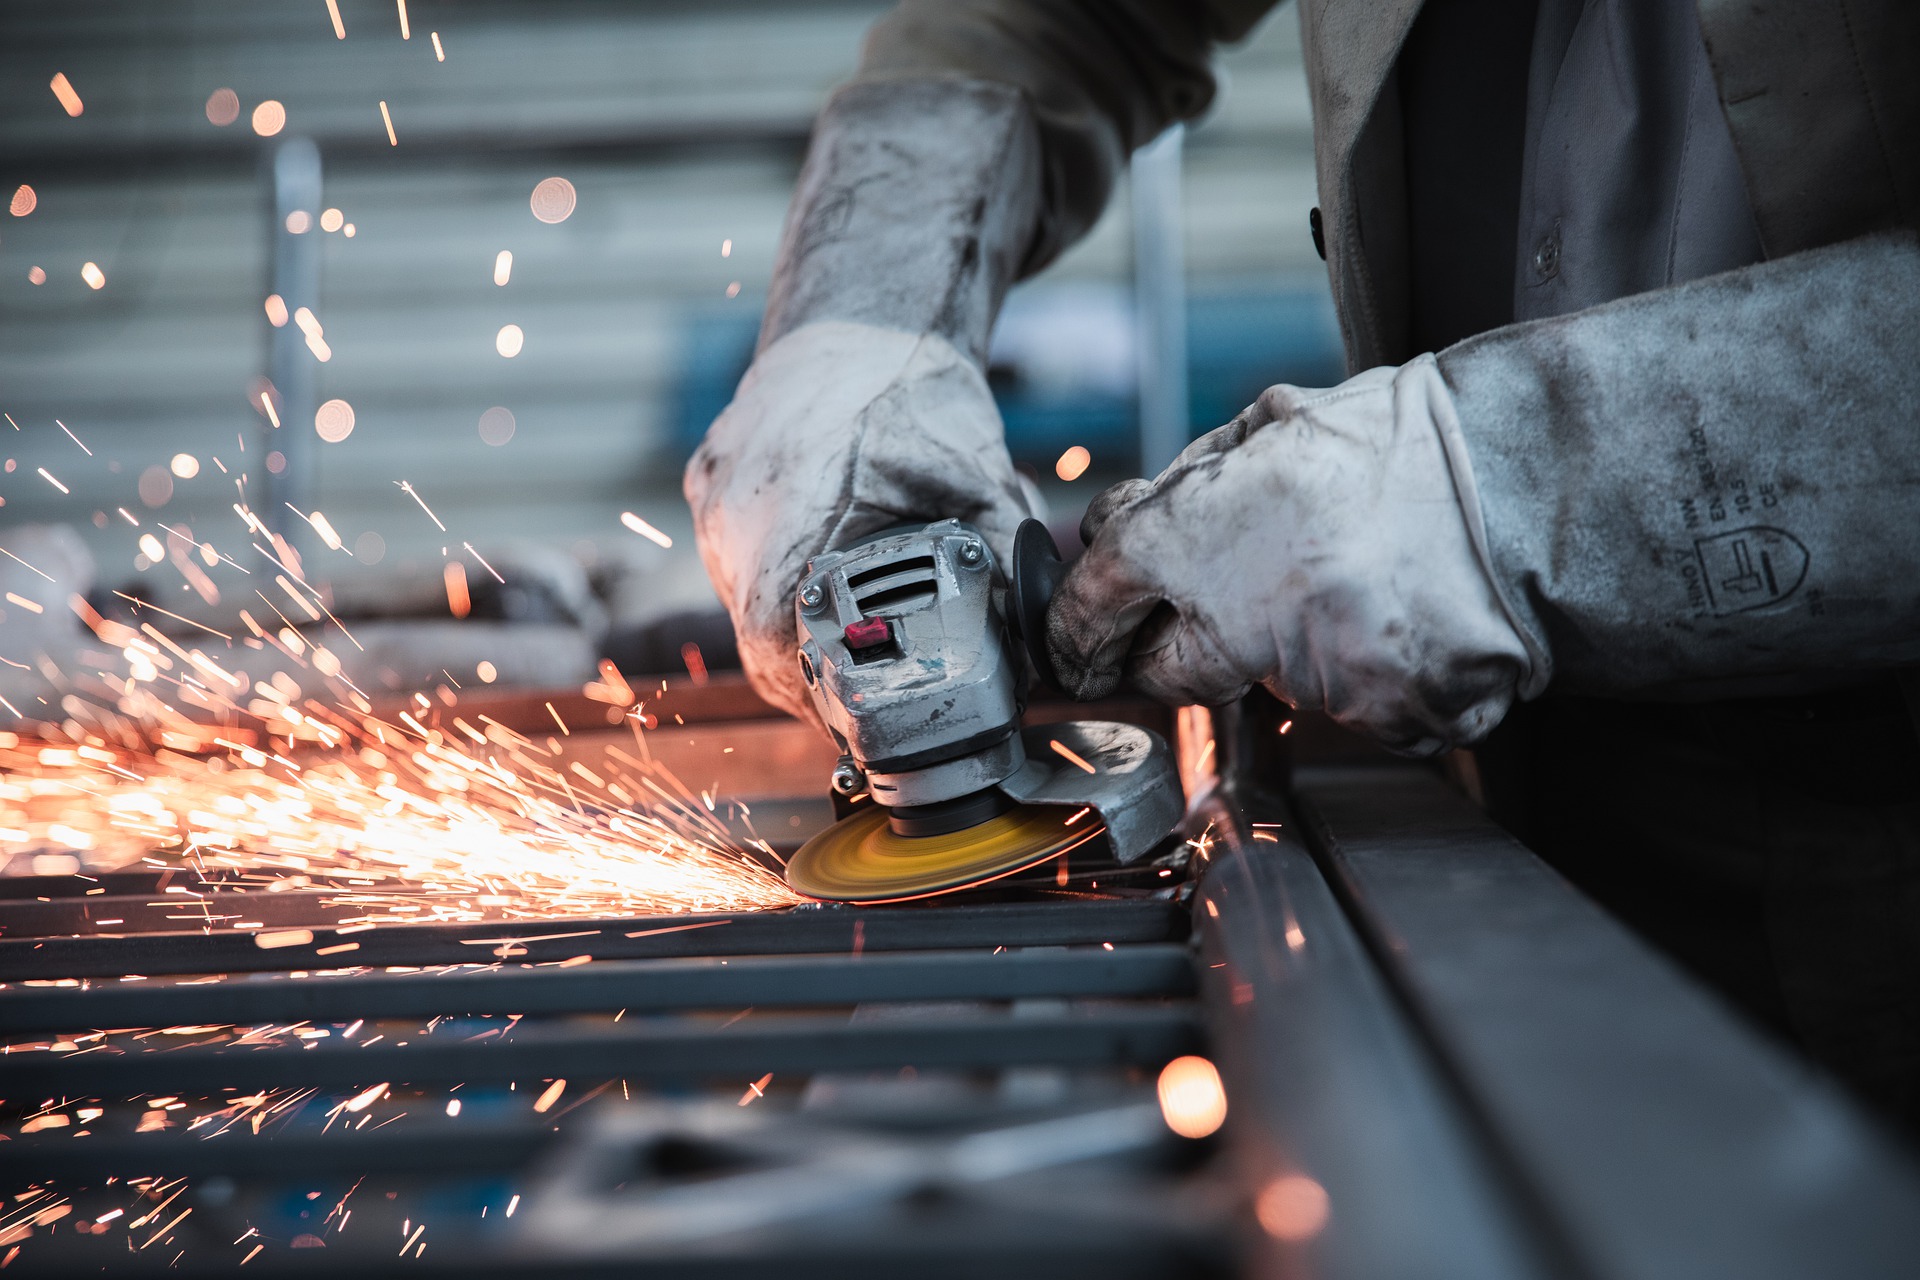 A metal worker using an angle grinder to cut steel.